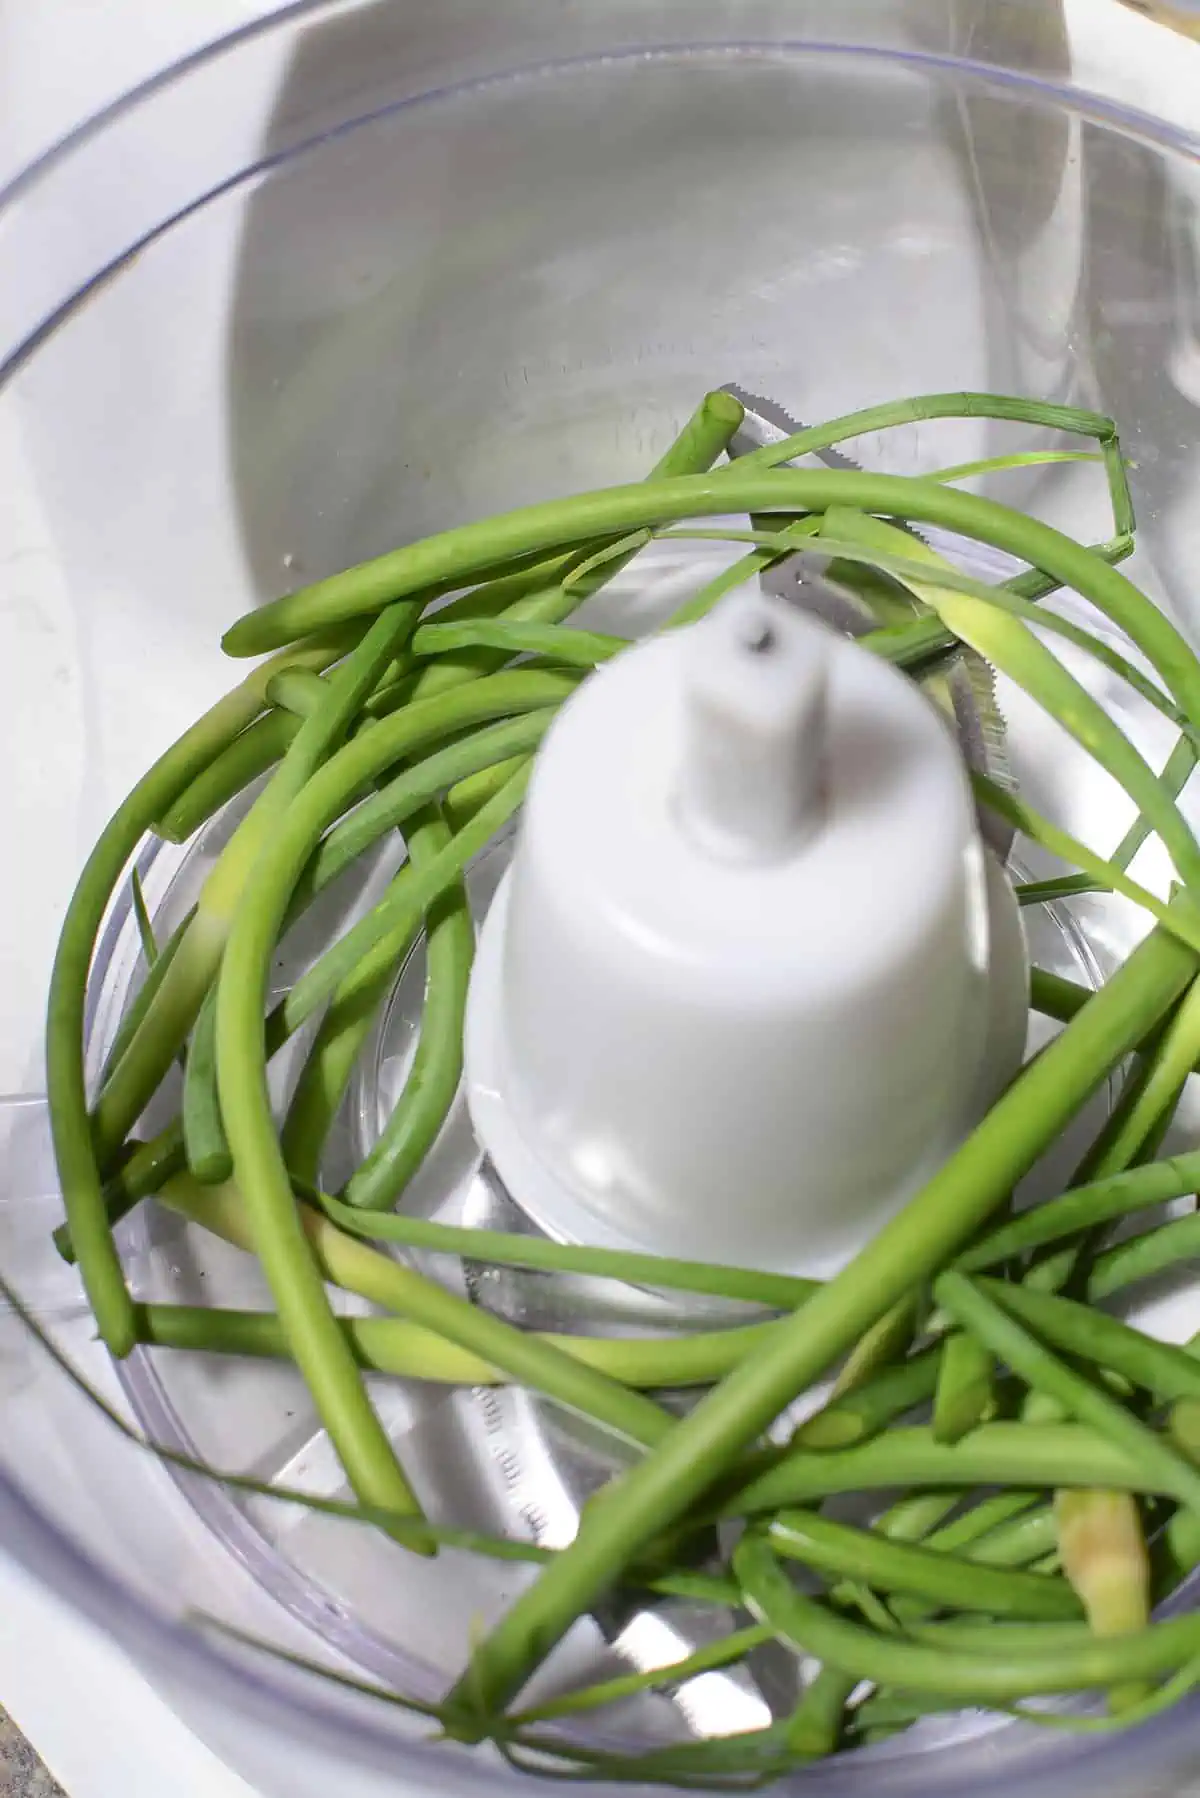 Garlic scapes in the food processor.